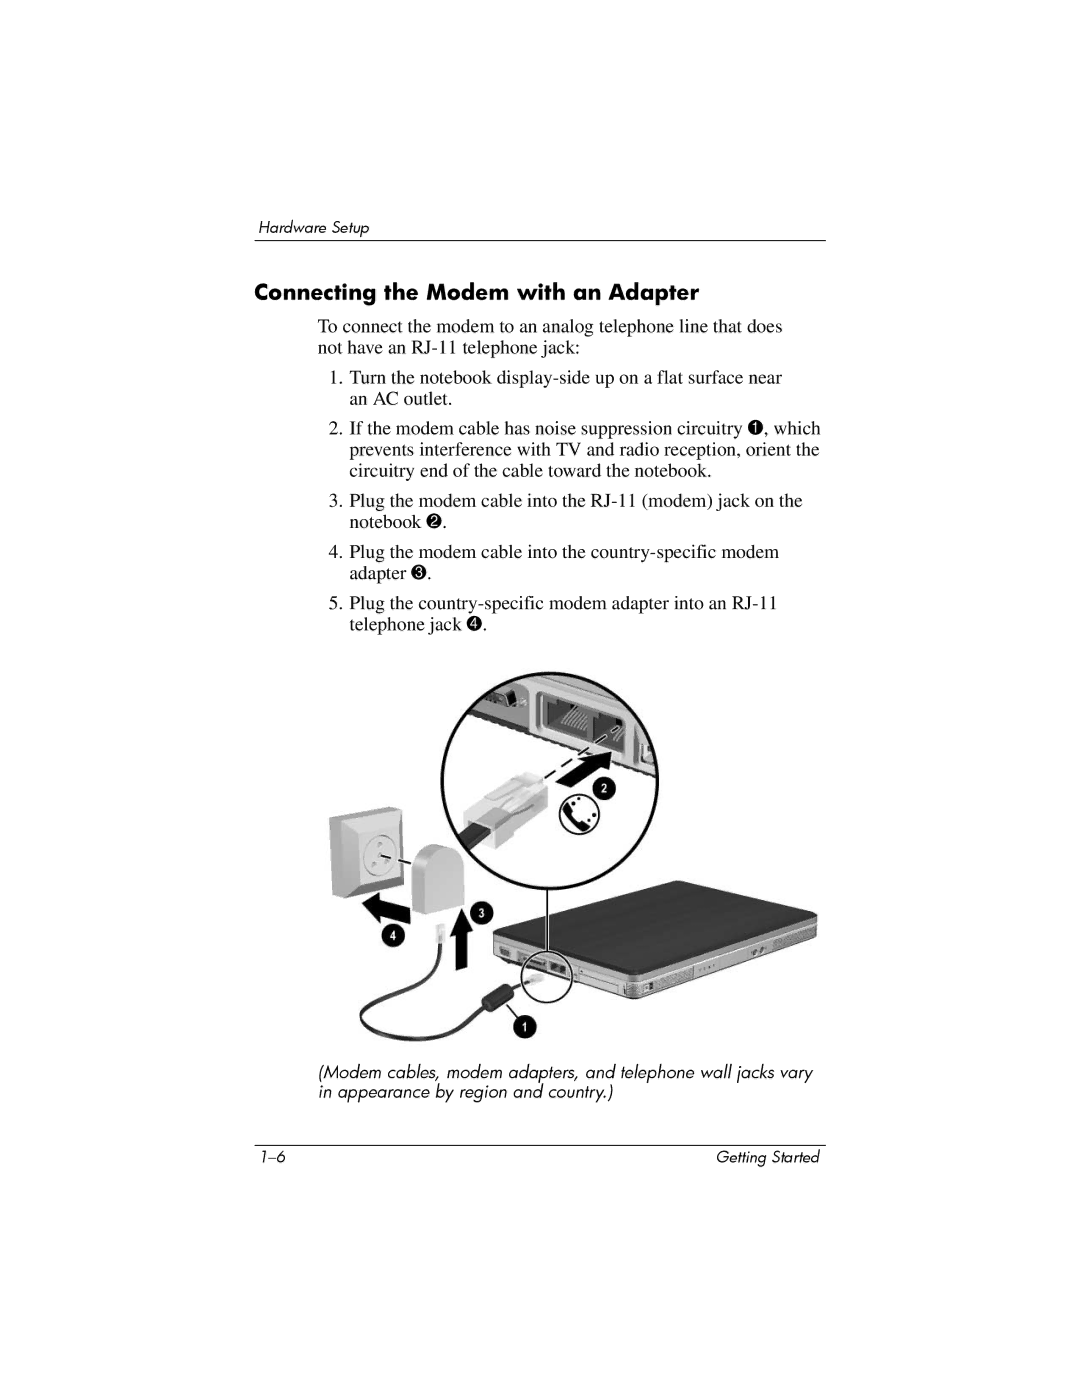 HP V2027AP, V2042AP, V2046AP, V2069CL, V2044AP, V2037AP, V2034AP, V2038AP, V2030US, V2031AP Connecting the Modem with an Adapter 